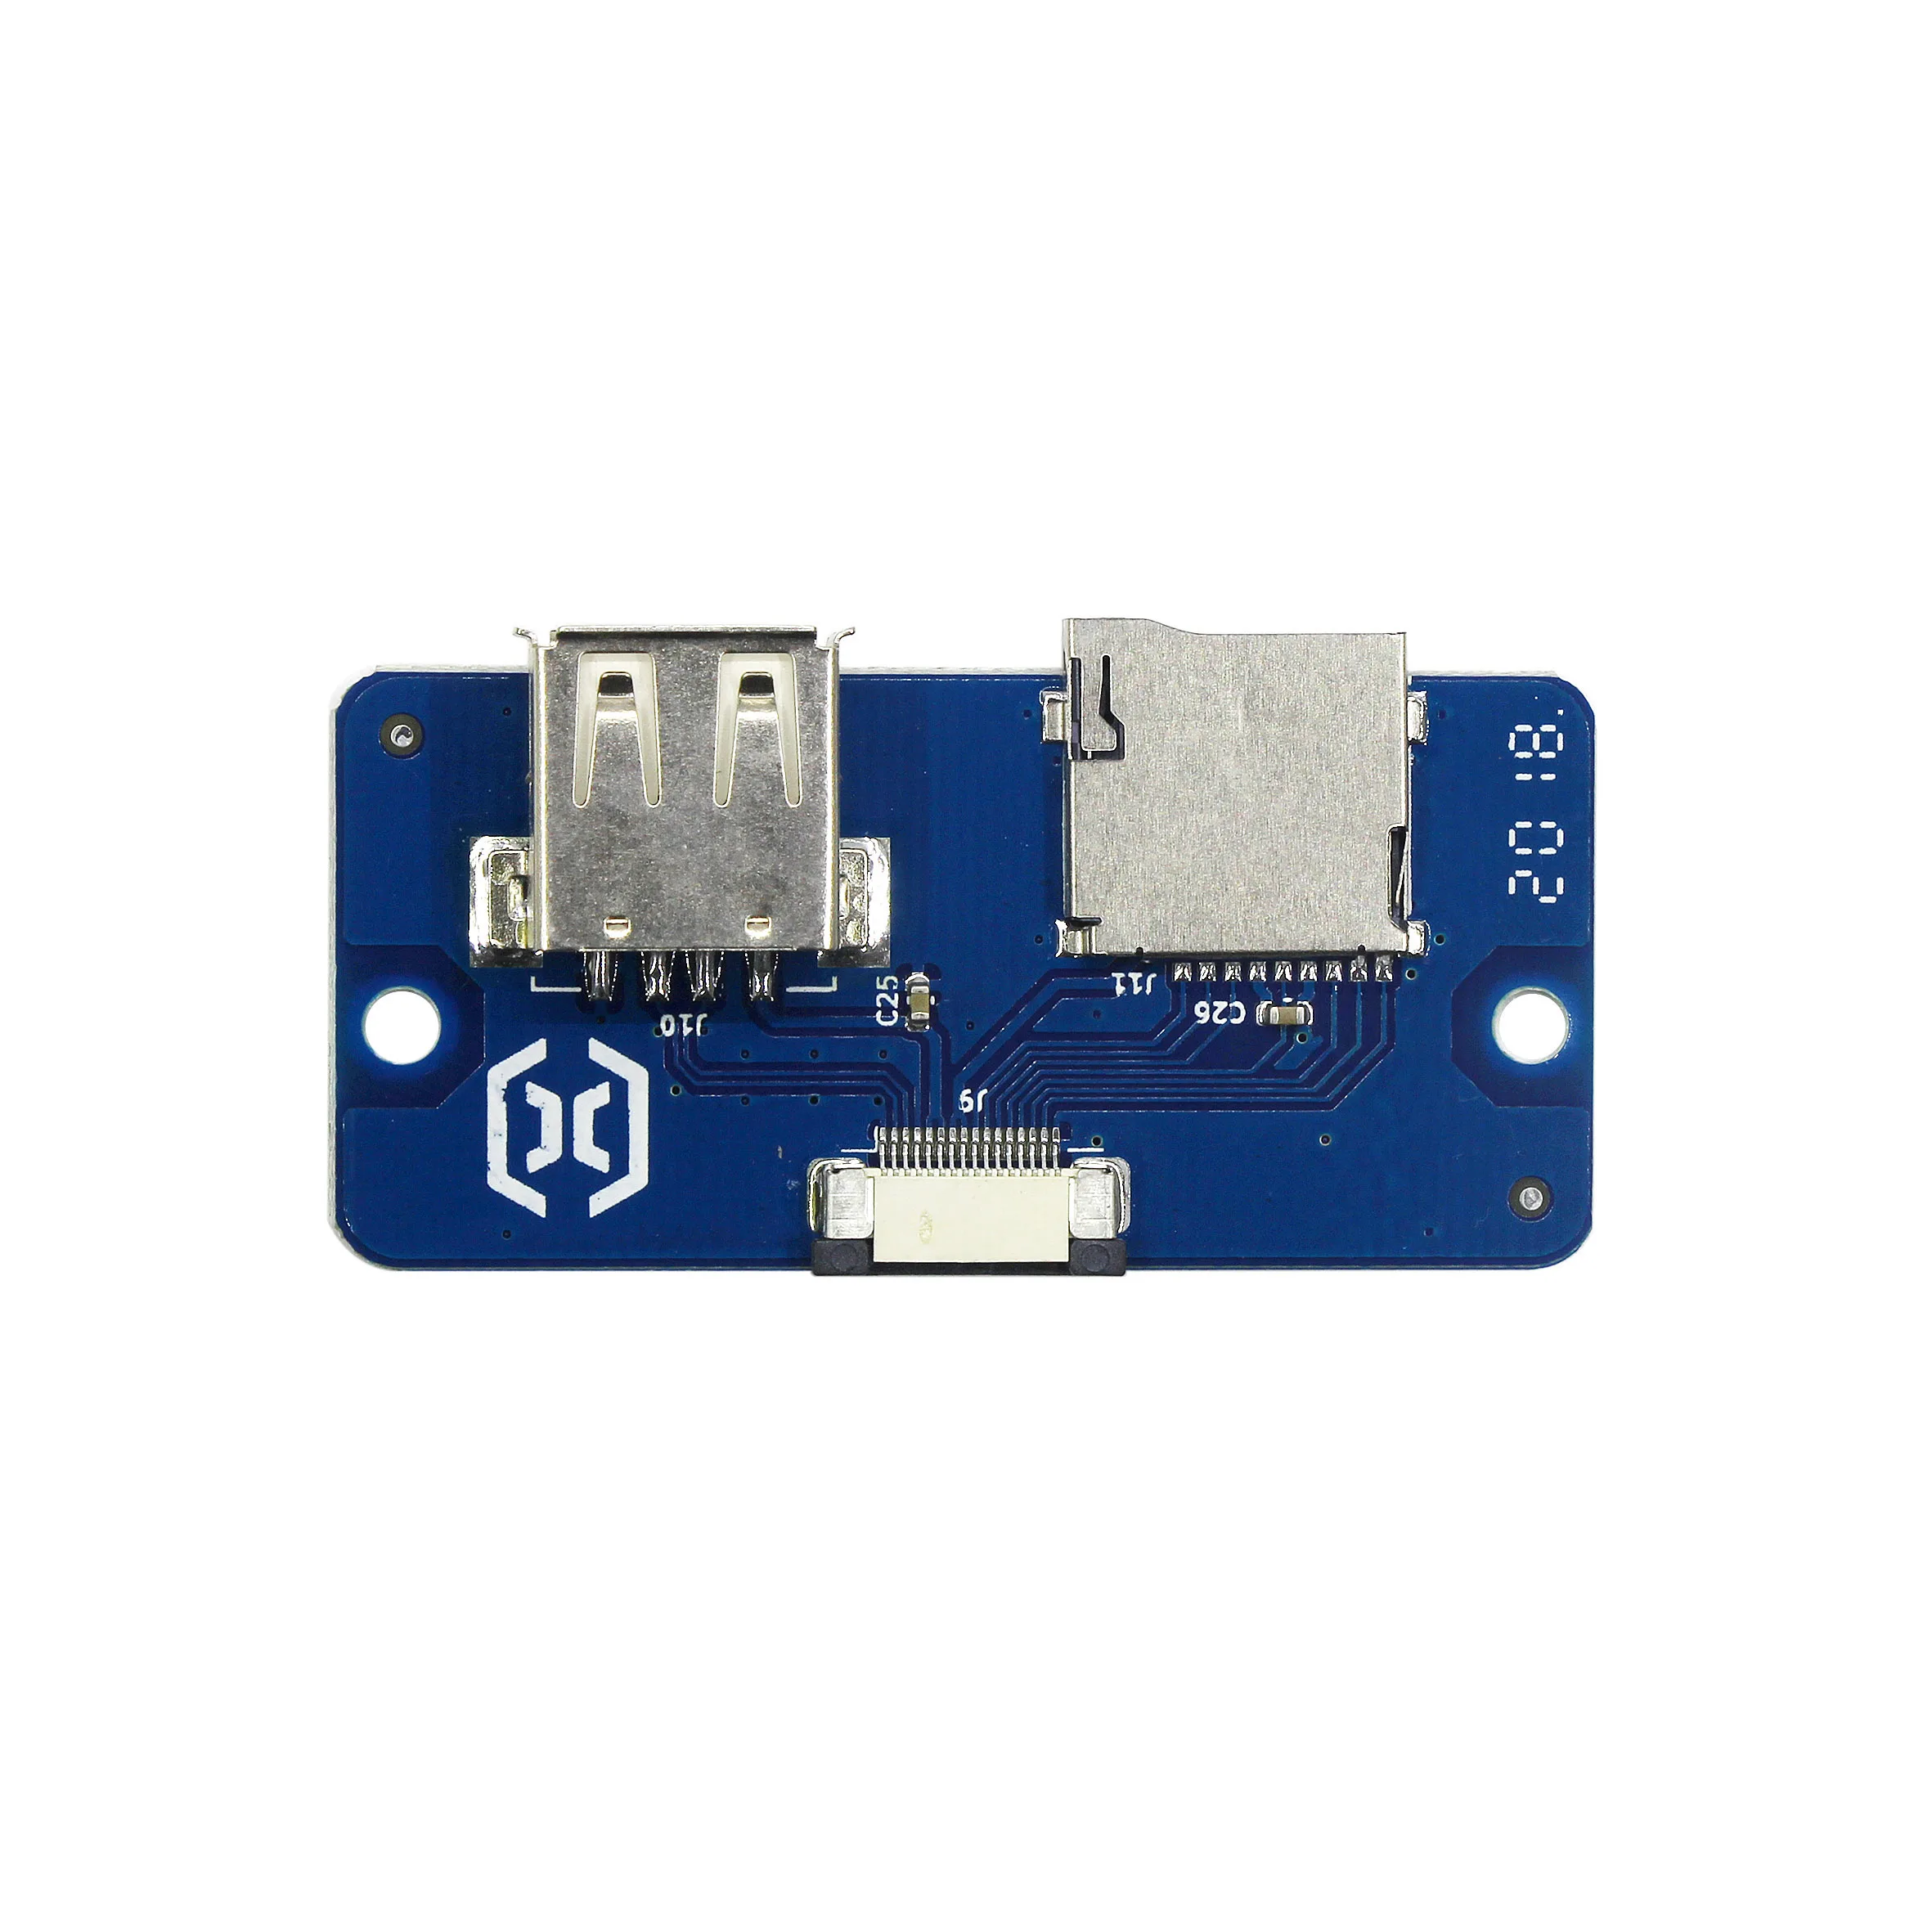 

Sidewinders X1 X2 Genius Pro 3D Printer Parts Printer USB Interface Card Adapter PCB Board Connection Touch Display